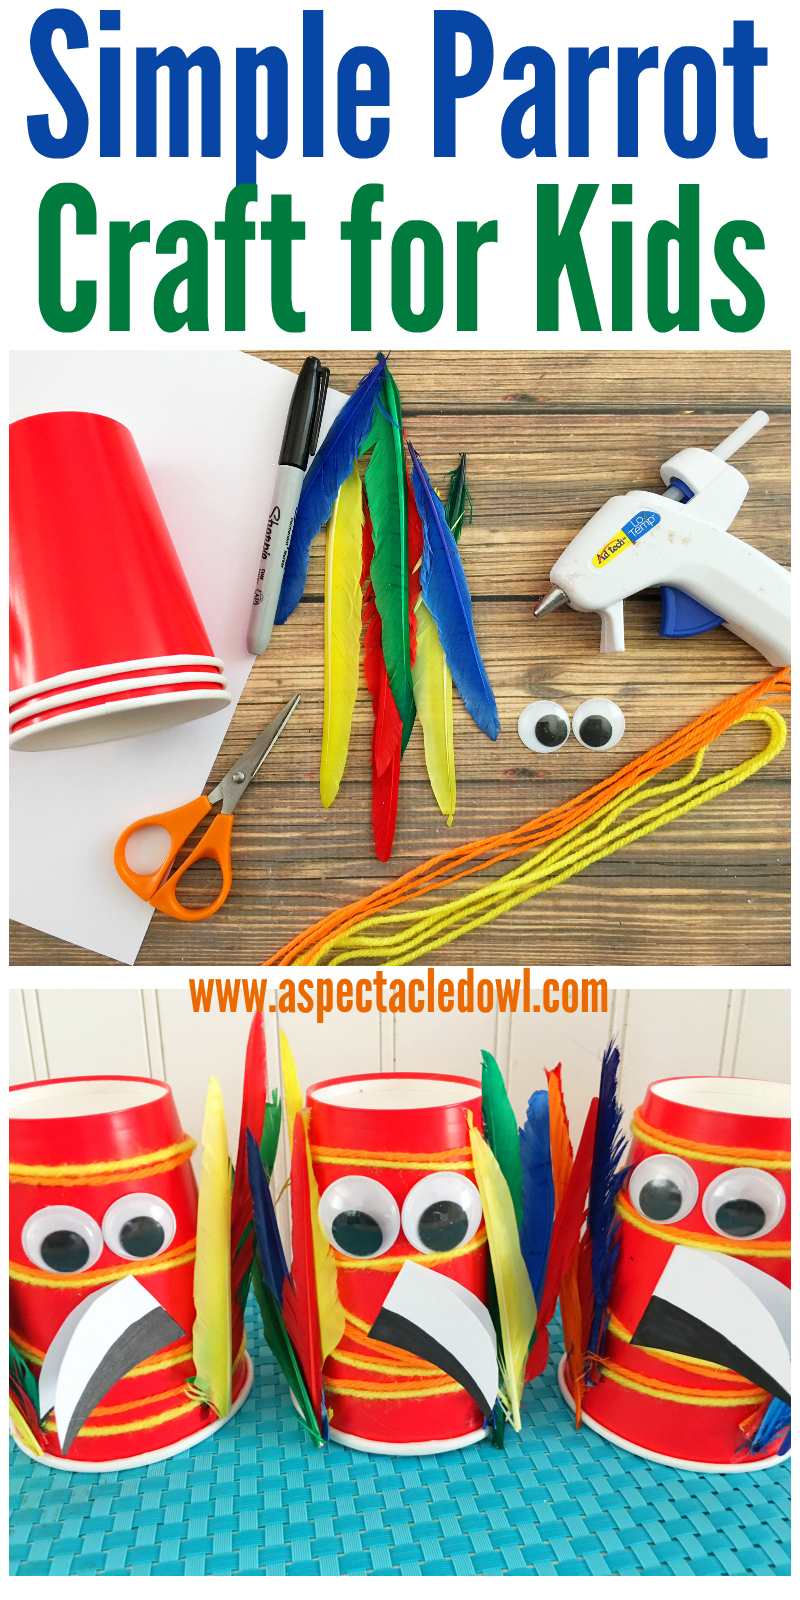 Simple Parrot Craft for Kids